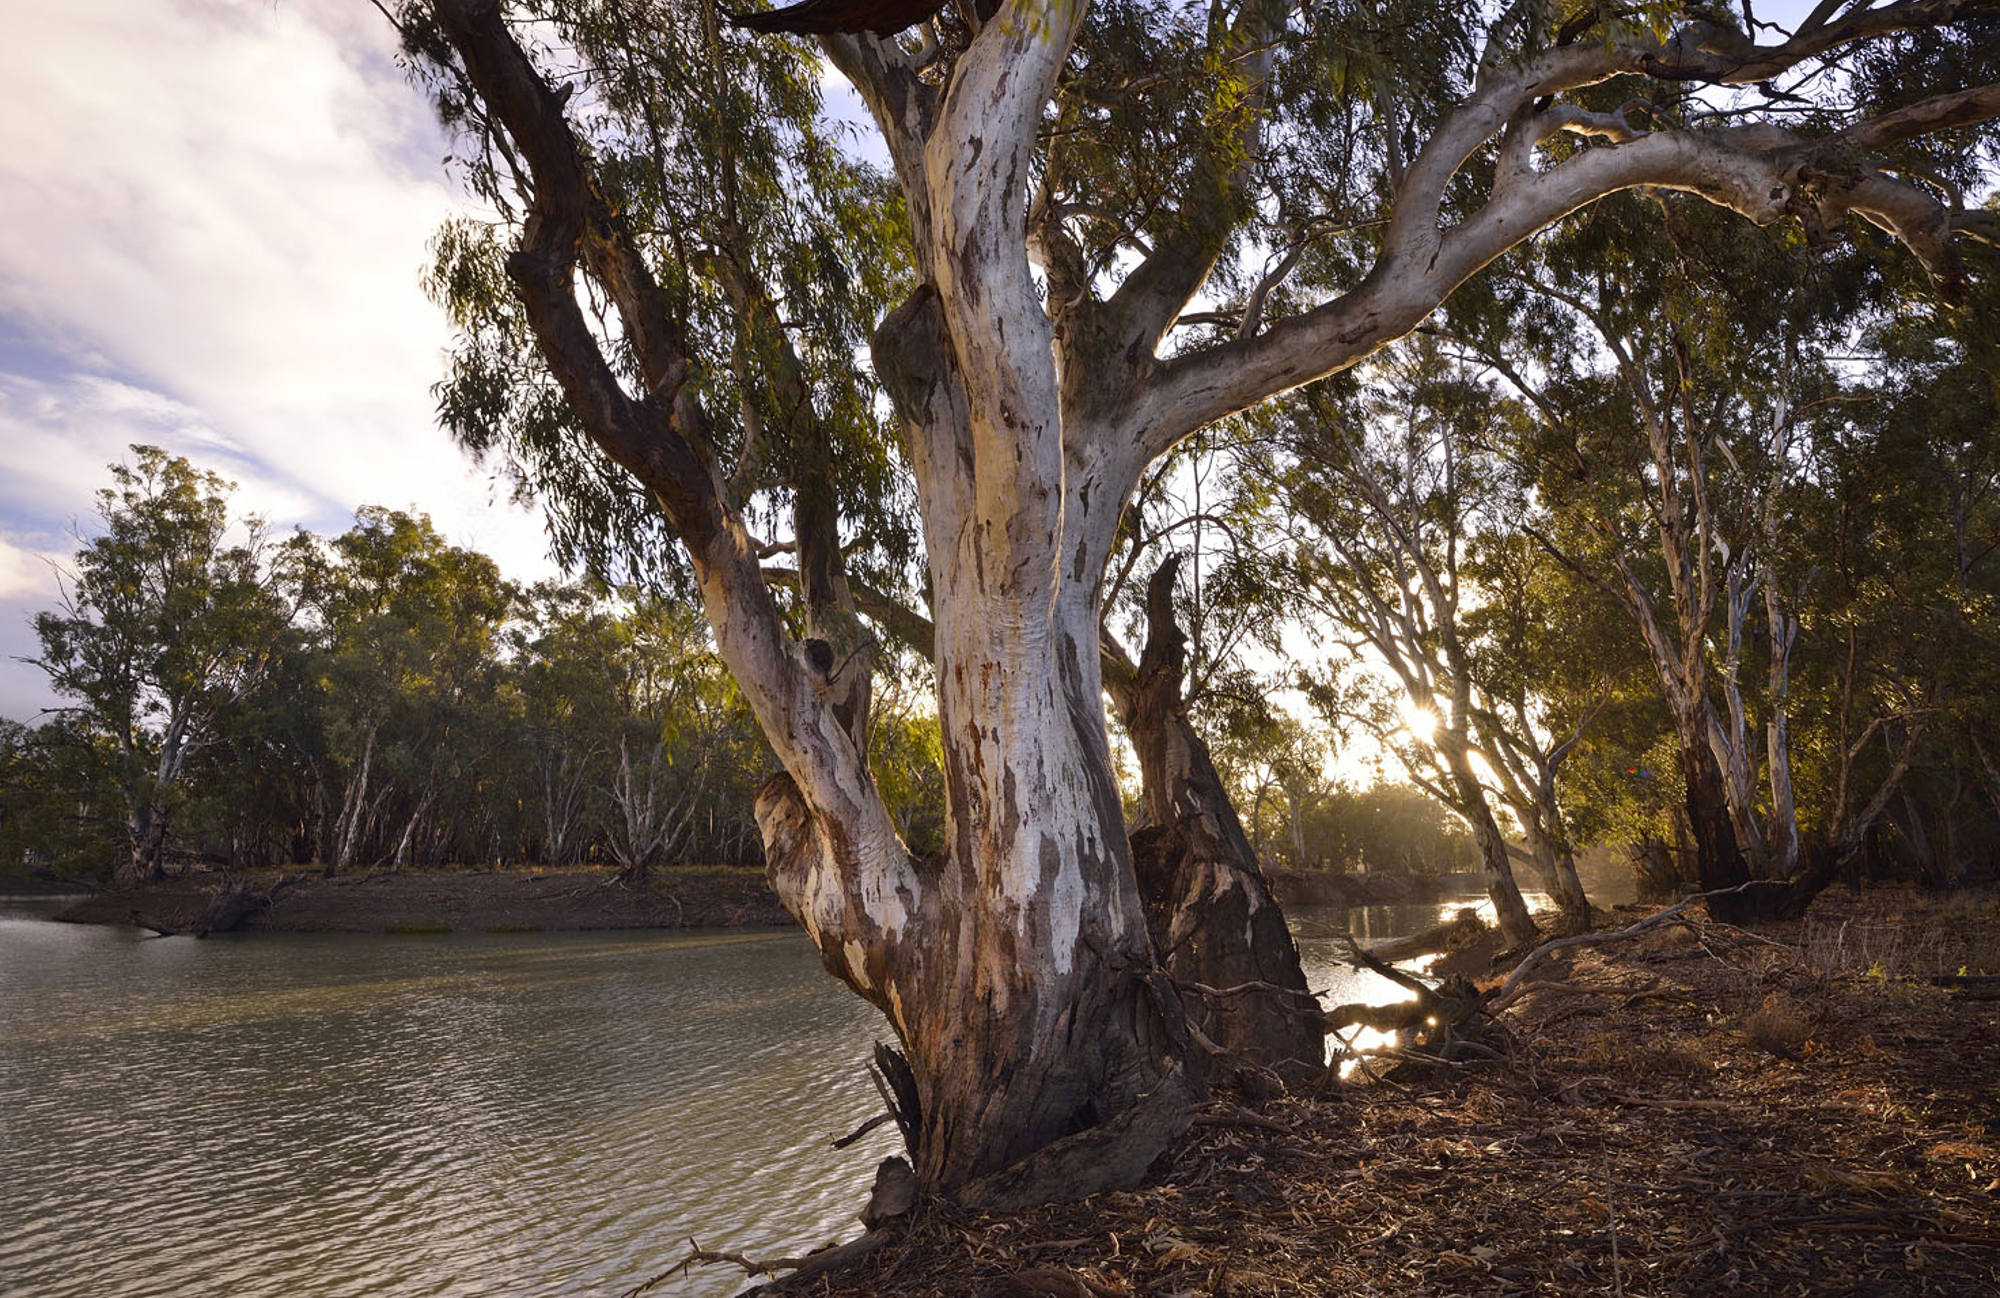 View of Murrumbidgee River with large gum tree in the foreground.  Photo: Gavin Hansford/OEH.